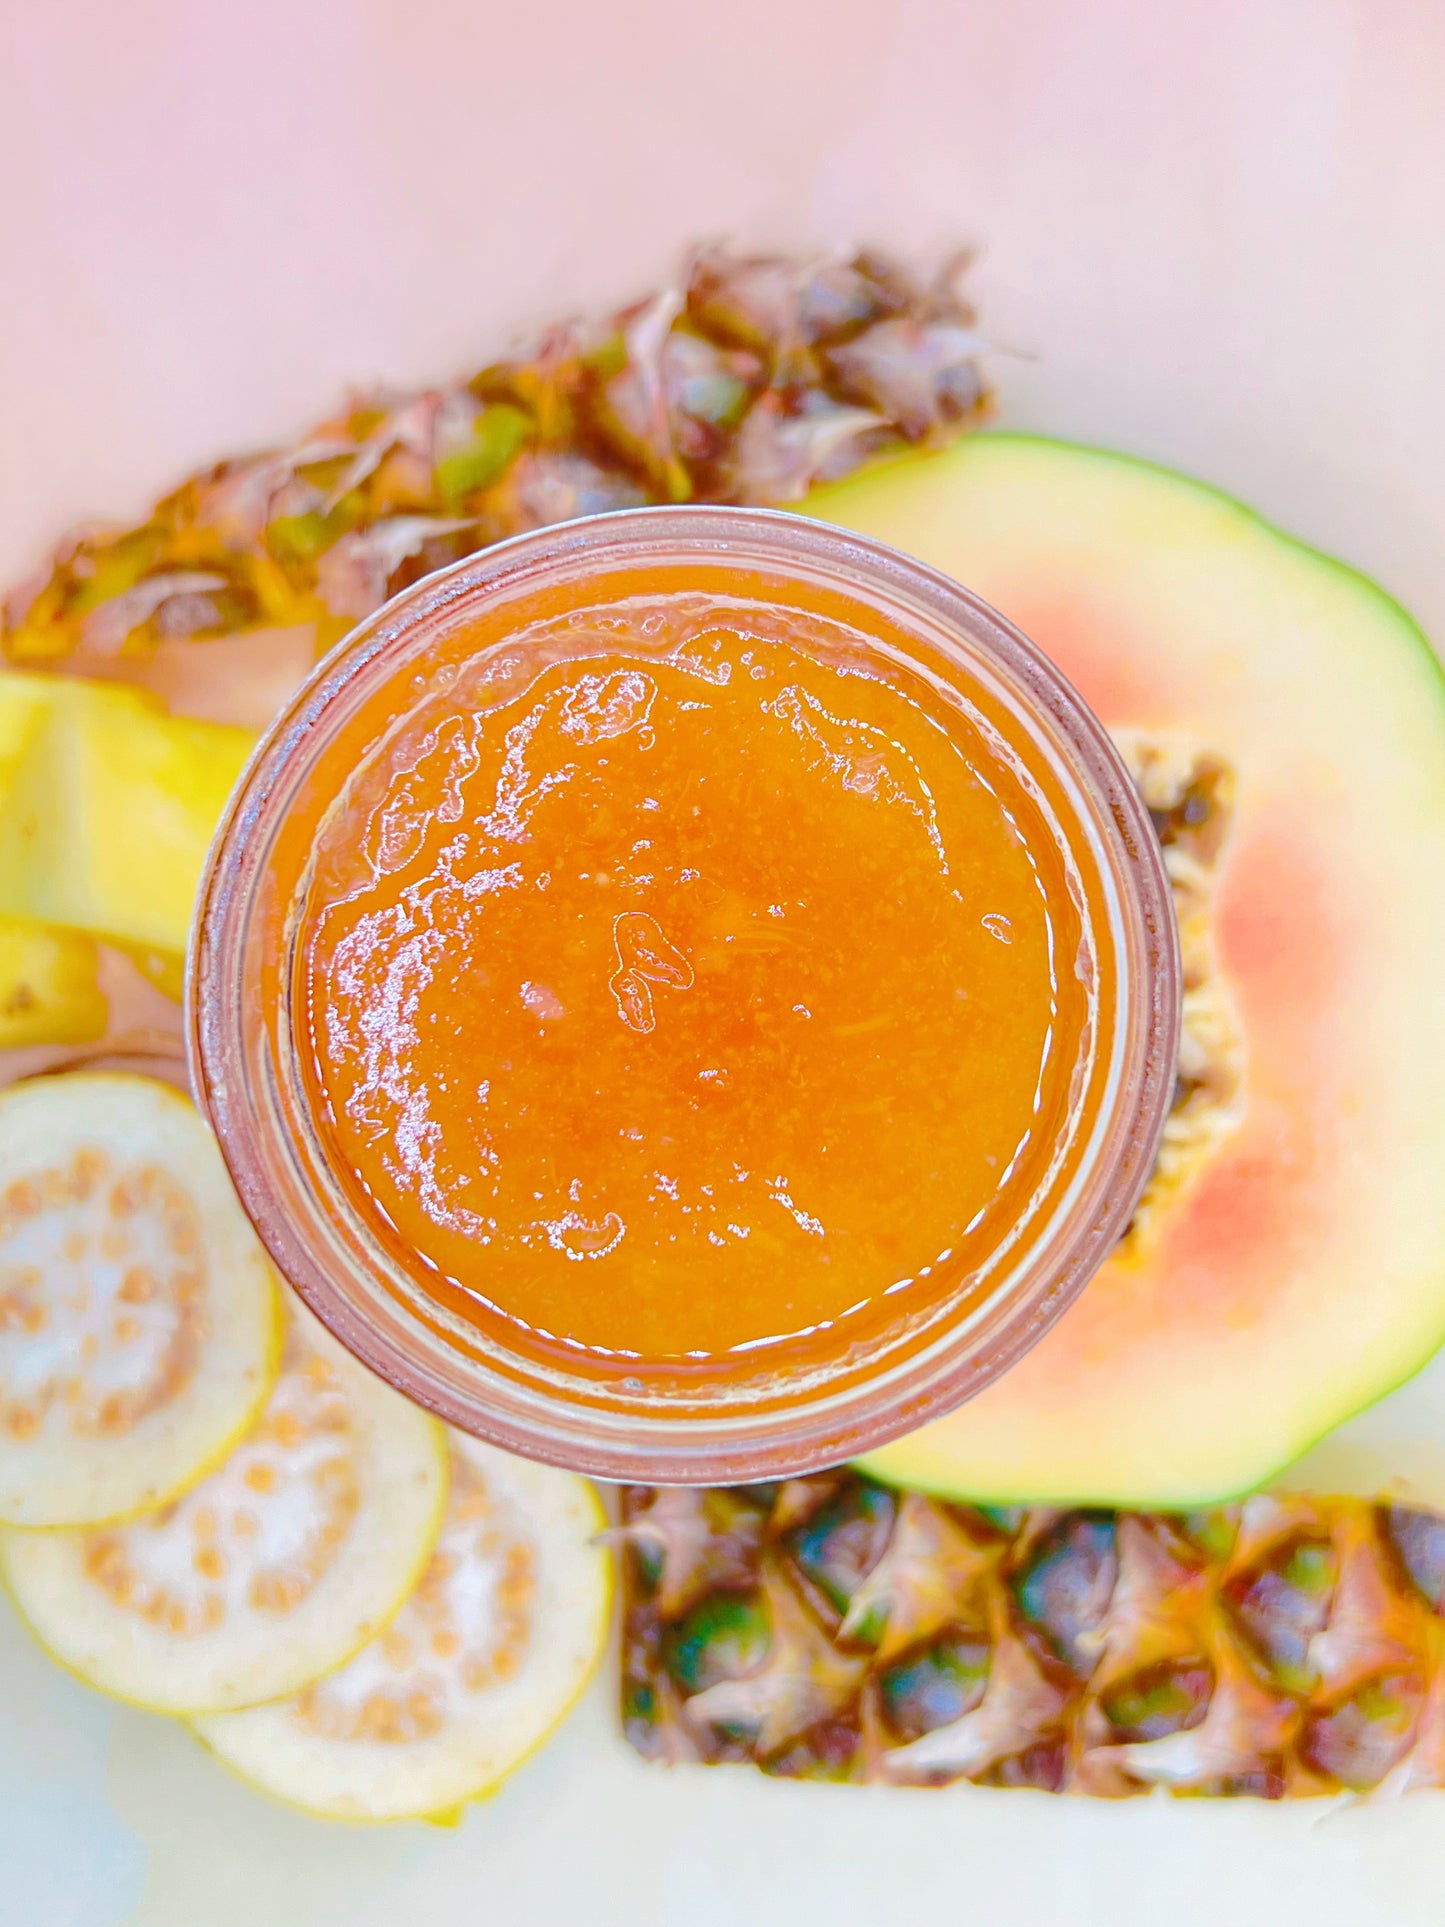 Papaya, guava, and pineapple are a great combination.